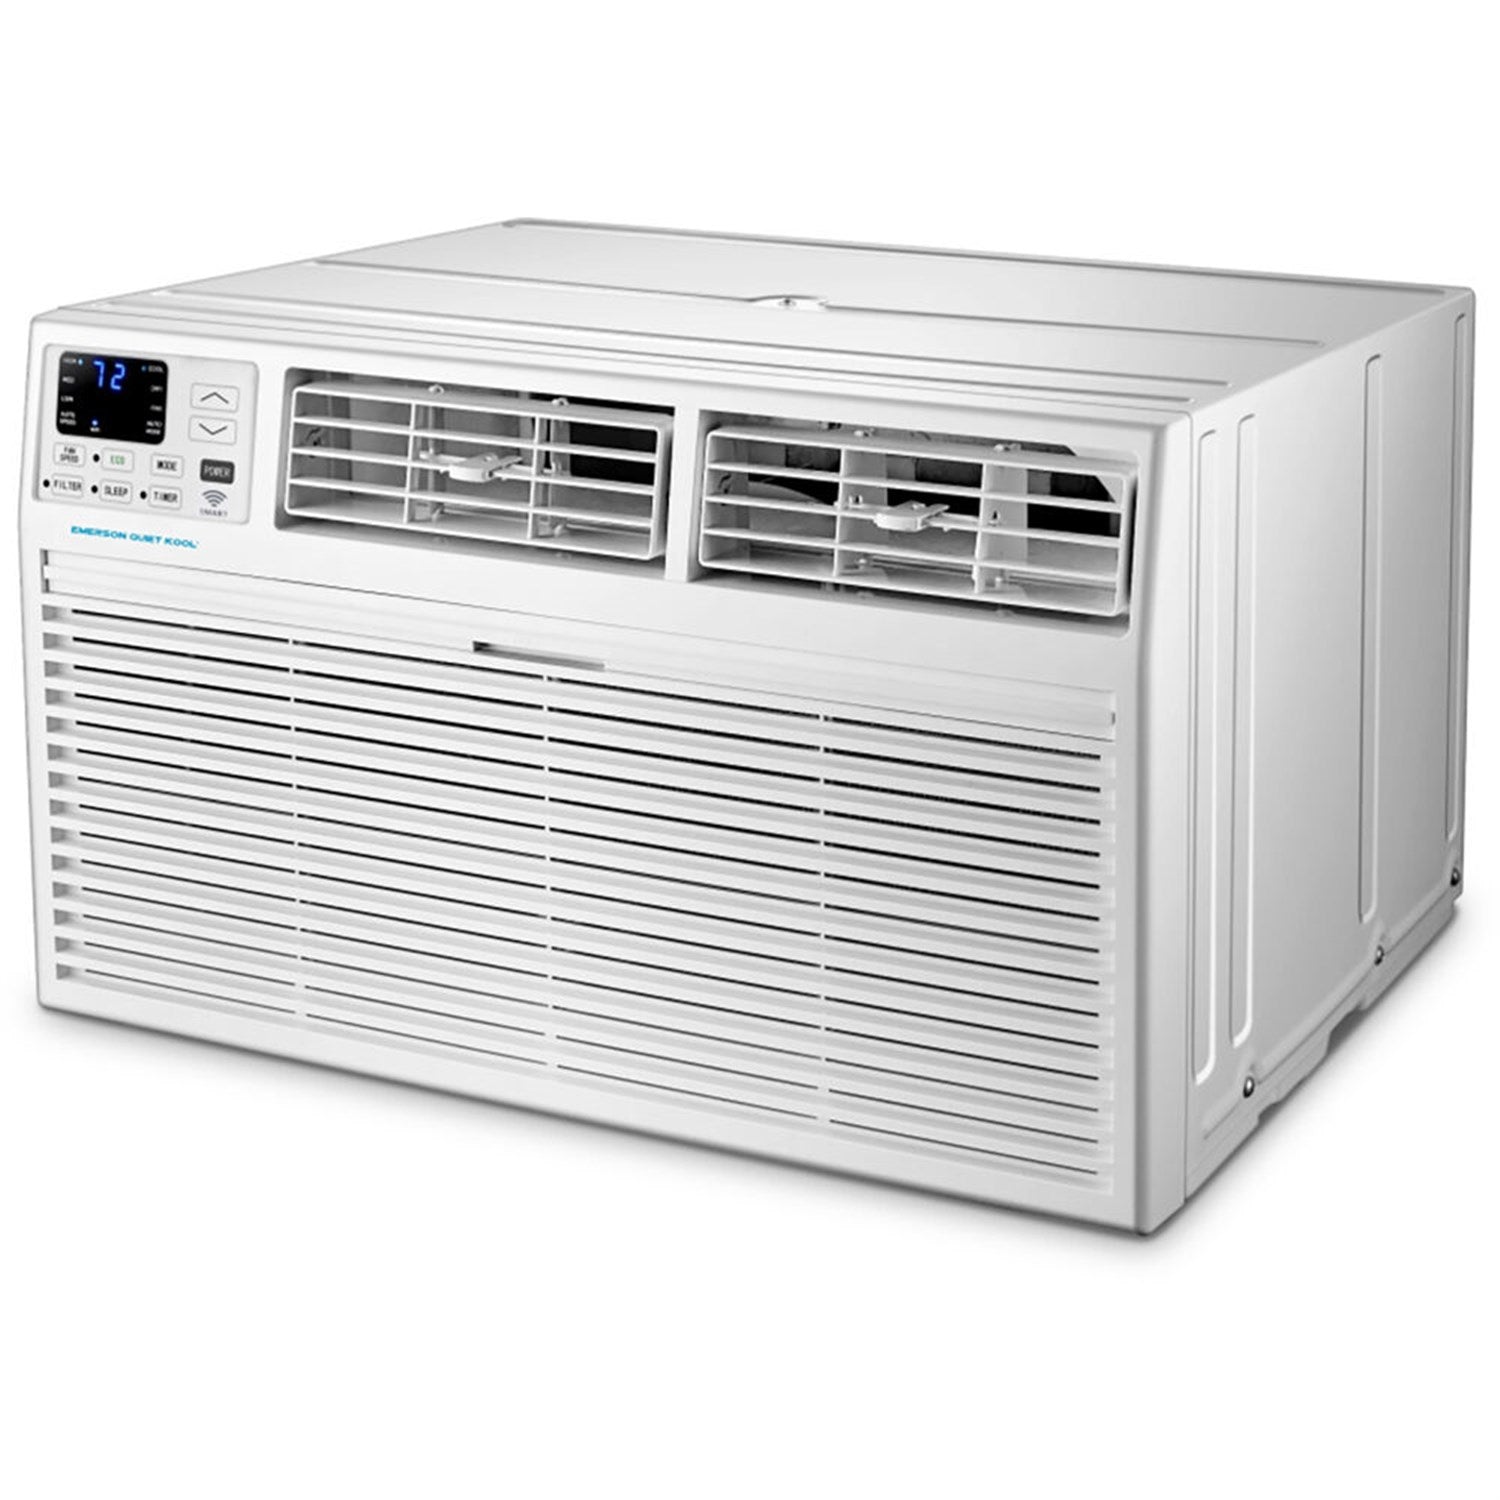 Emerson Quiet Kool 8,000 BTU 115V SMART Through-the-Wall Air Conditioner with Remote, Wi-Fi, and Voice Control